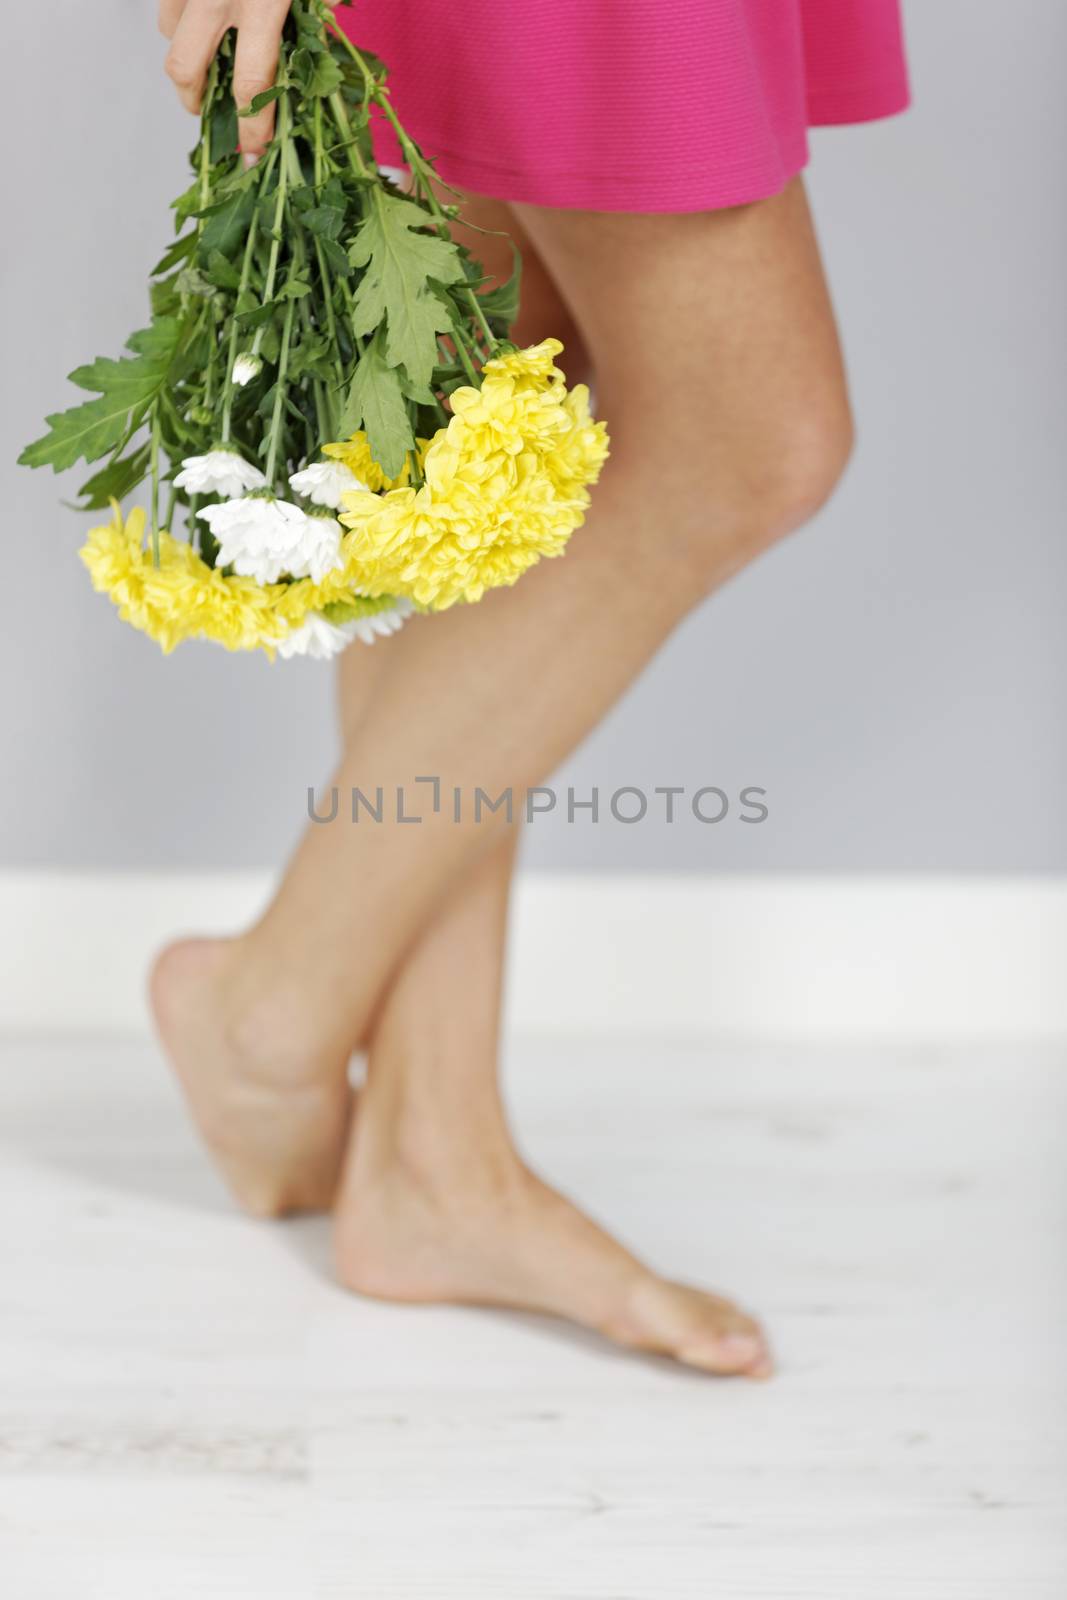 A fresh bouquet of flowers next to a woman's legs